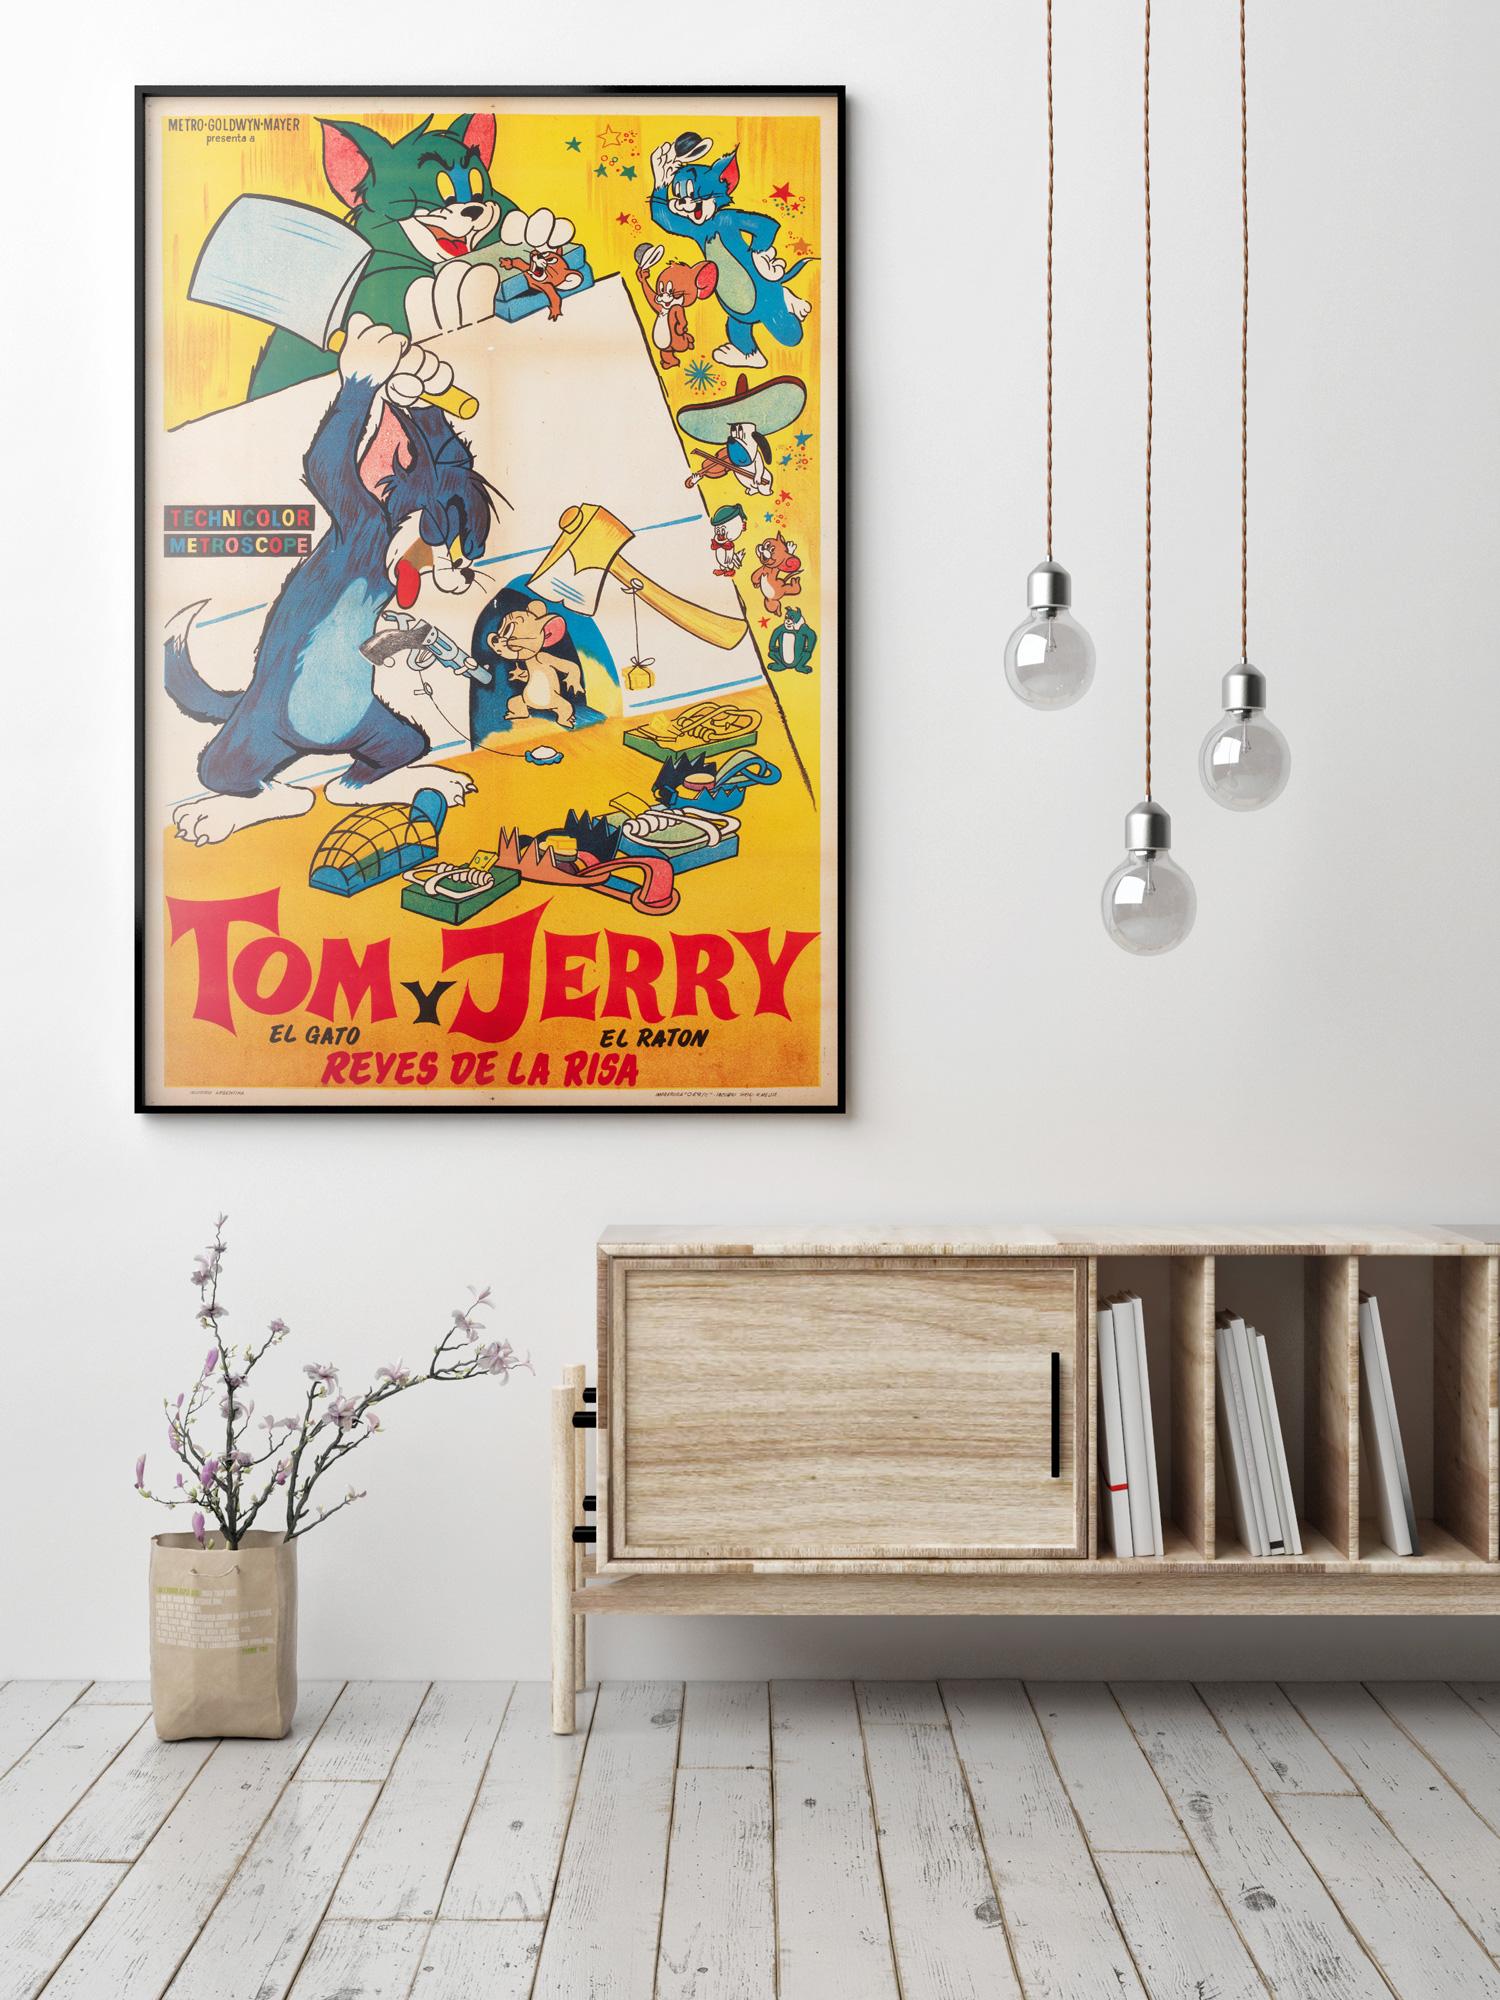 We adore this softly and beautifully illustrated Argentinian film poster for Tom & Jerry. A truly lovely poster.

This original vintage film poster is sized is 29 x 43 inches. It will be sent rolled (unframed).